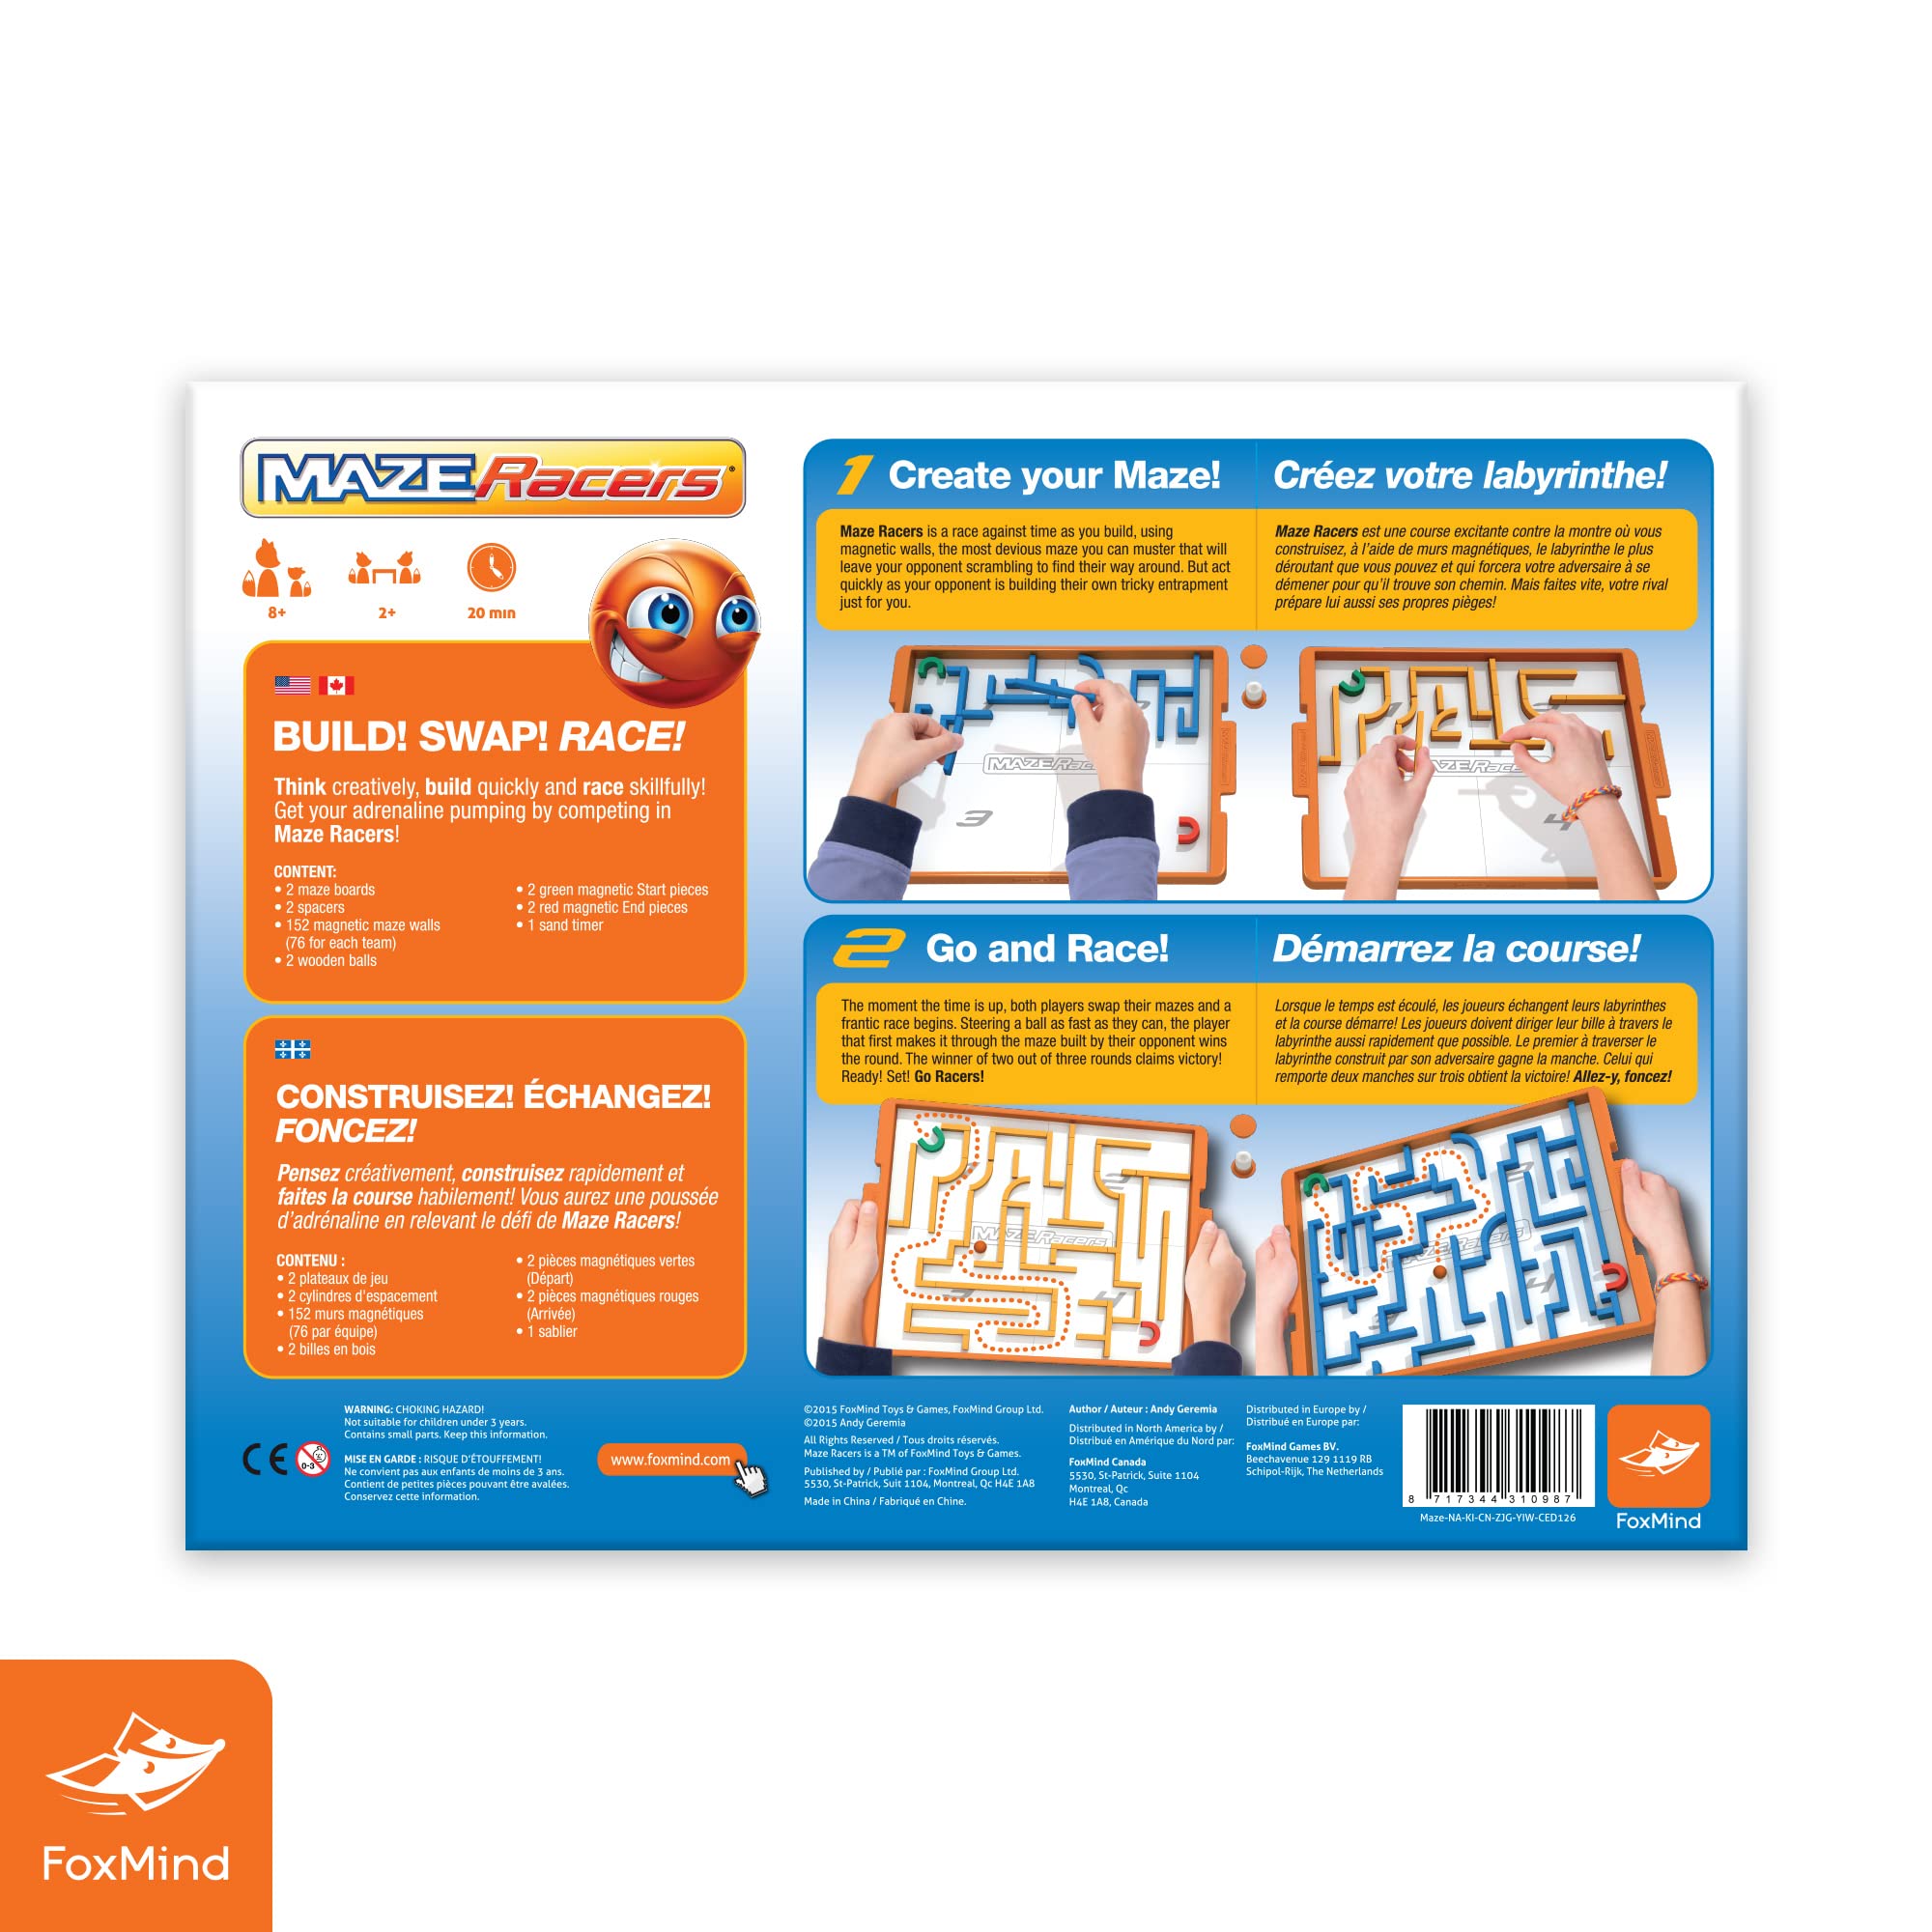 FoxMind Games: Maze Racers, Exciting Building and Racing Board Game, Competitive Gameplay, 2 to 4 Players, Small Parts Included, For Ages 8 and up